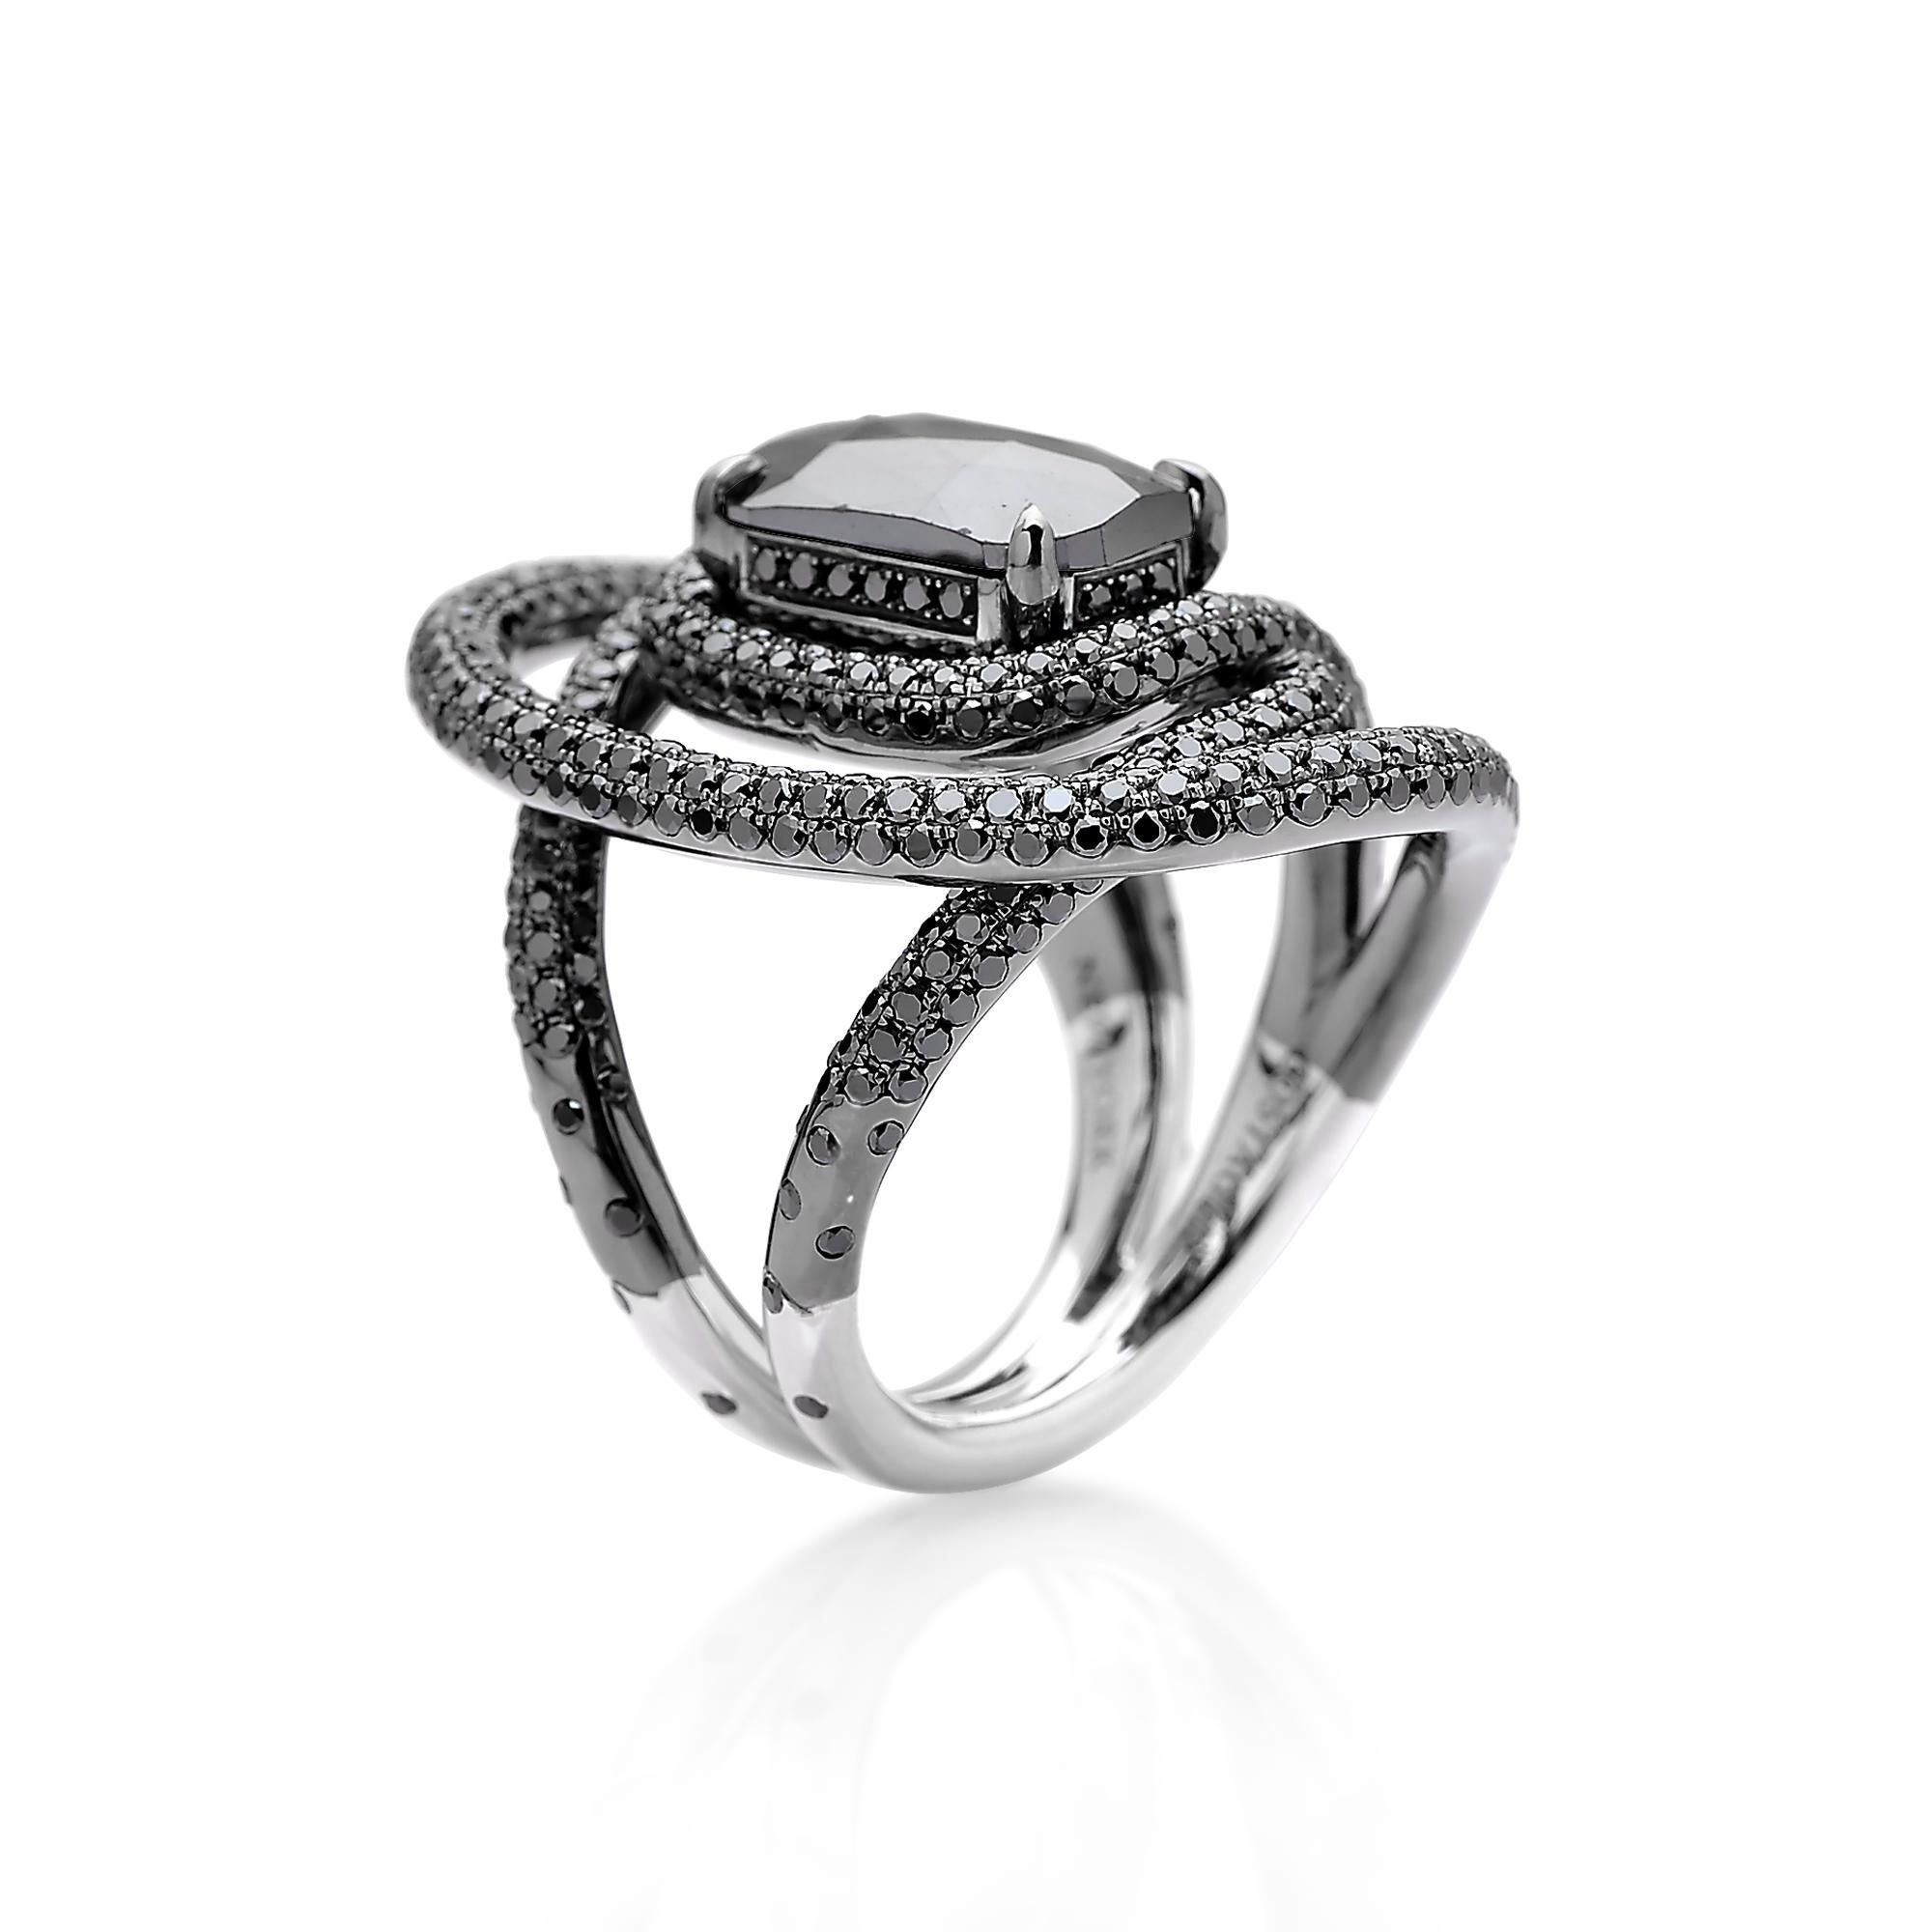 From the 'Intrecci' Collection, one-of-a-kind faceted cushion shape black diamond ring set in 18 karat white gold with black rhodium finish and pave-set black diamond detailing. 

The beauty is in the details - from the combination of hues, the cut